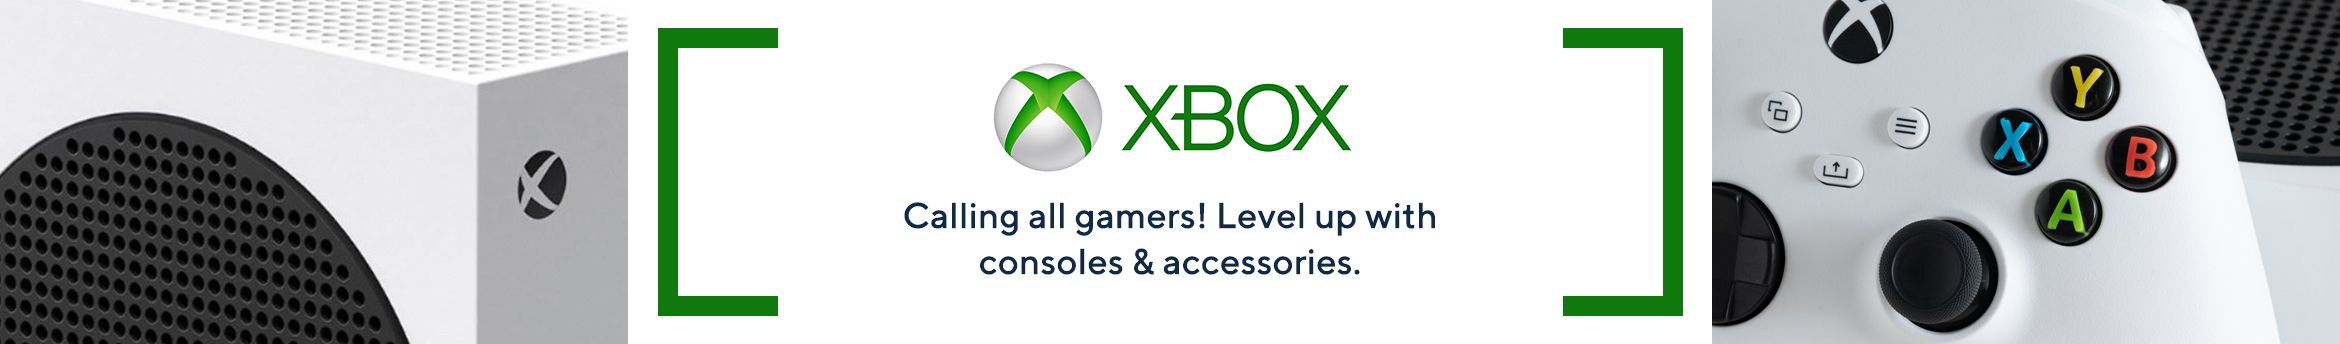 Xbox.  Calling all gamers! Level up with consoles & accessories.